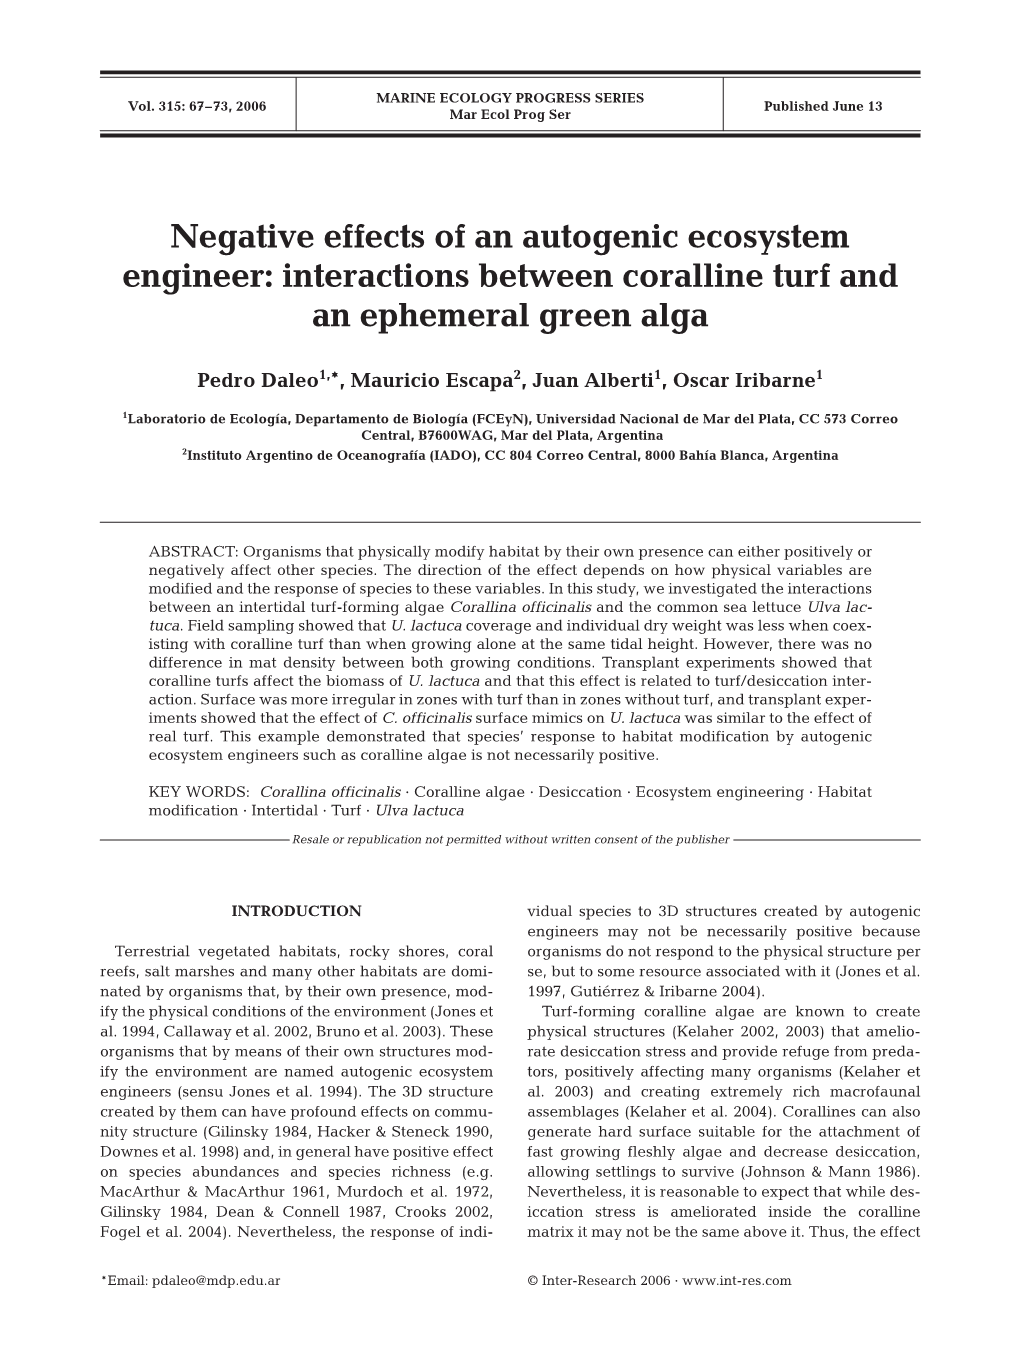 Negative Effects of an Autogenic Ecosystem Engineer: Interactions Between Coralline Turf and an Ephemeral Green Alga